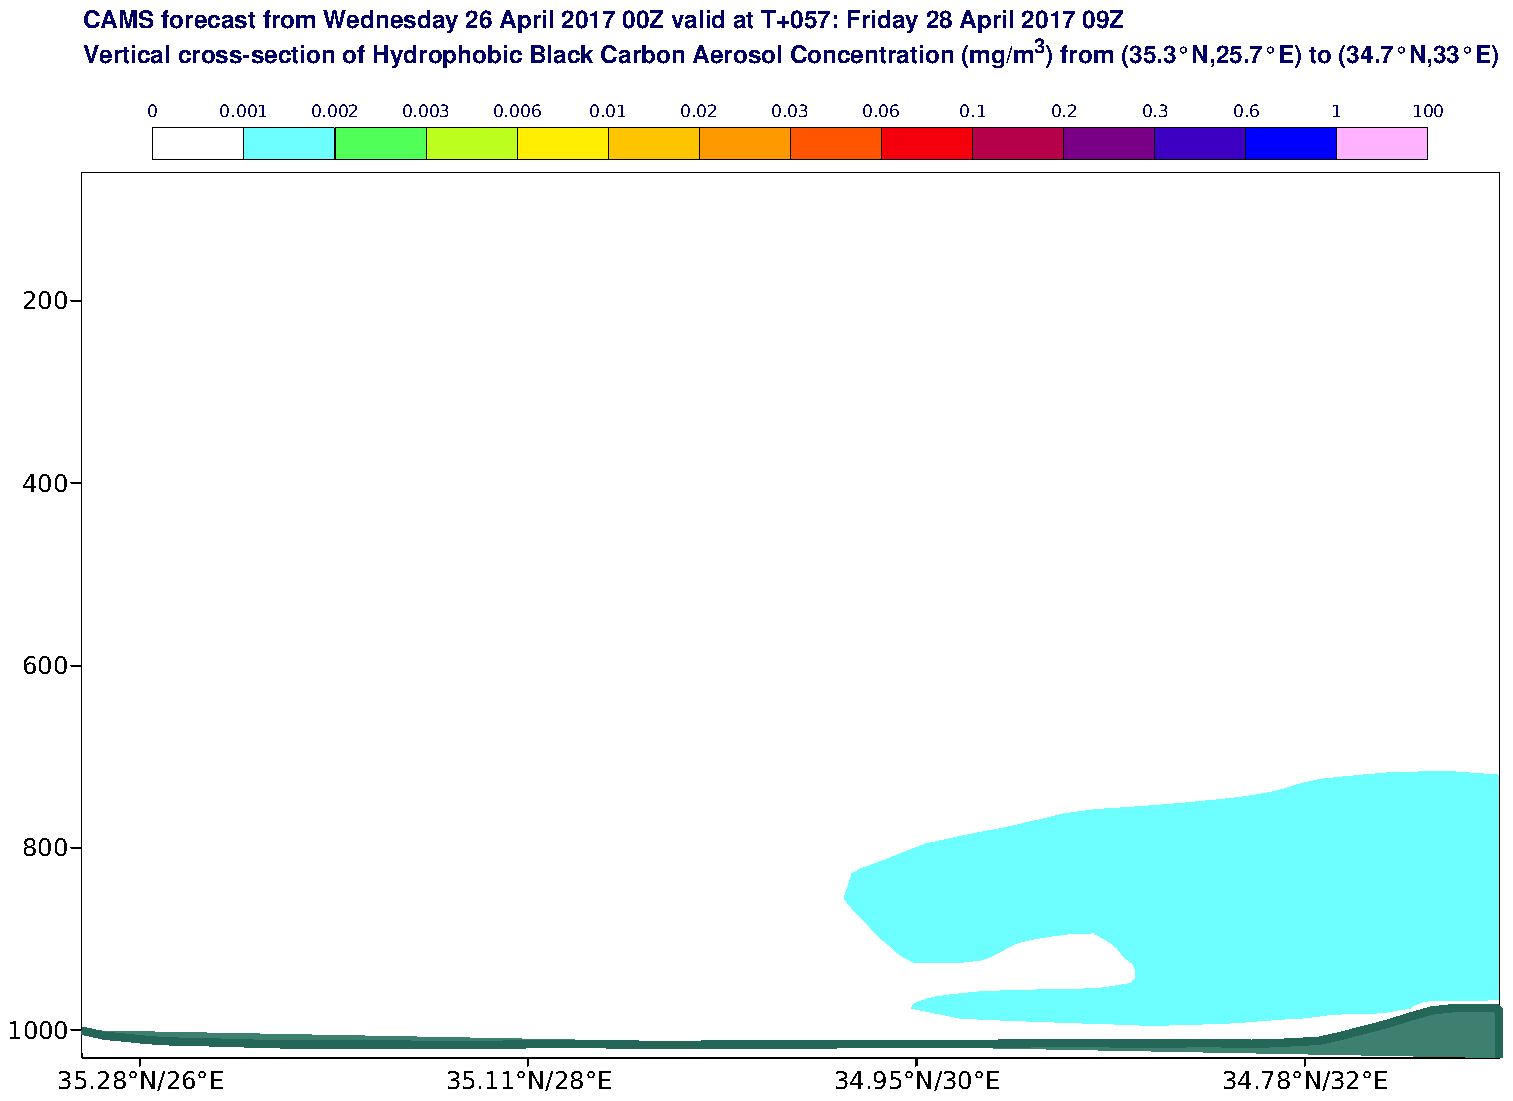 Vertical cross-section of Hydrophobic Black Carbon Aerosol Concentration (mg/m3) valid at T57 - 2017-04-28 09:00